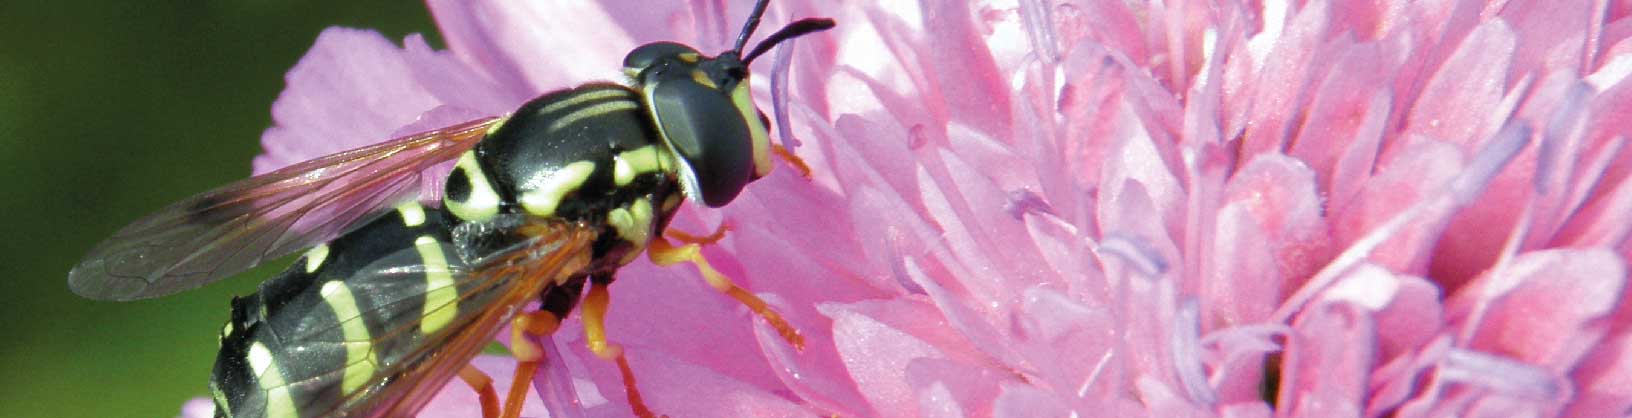 Help gather evidence on changes in insect populations